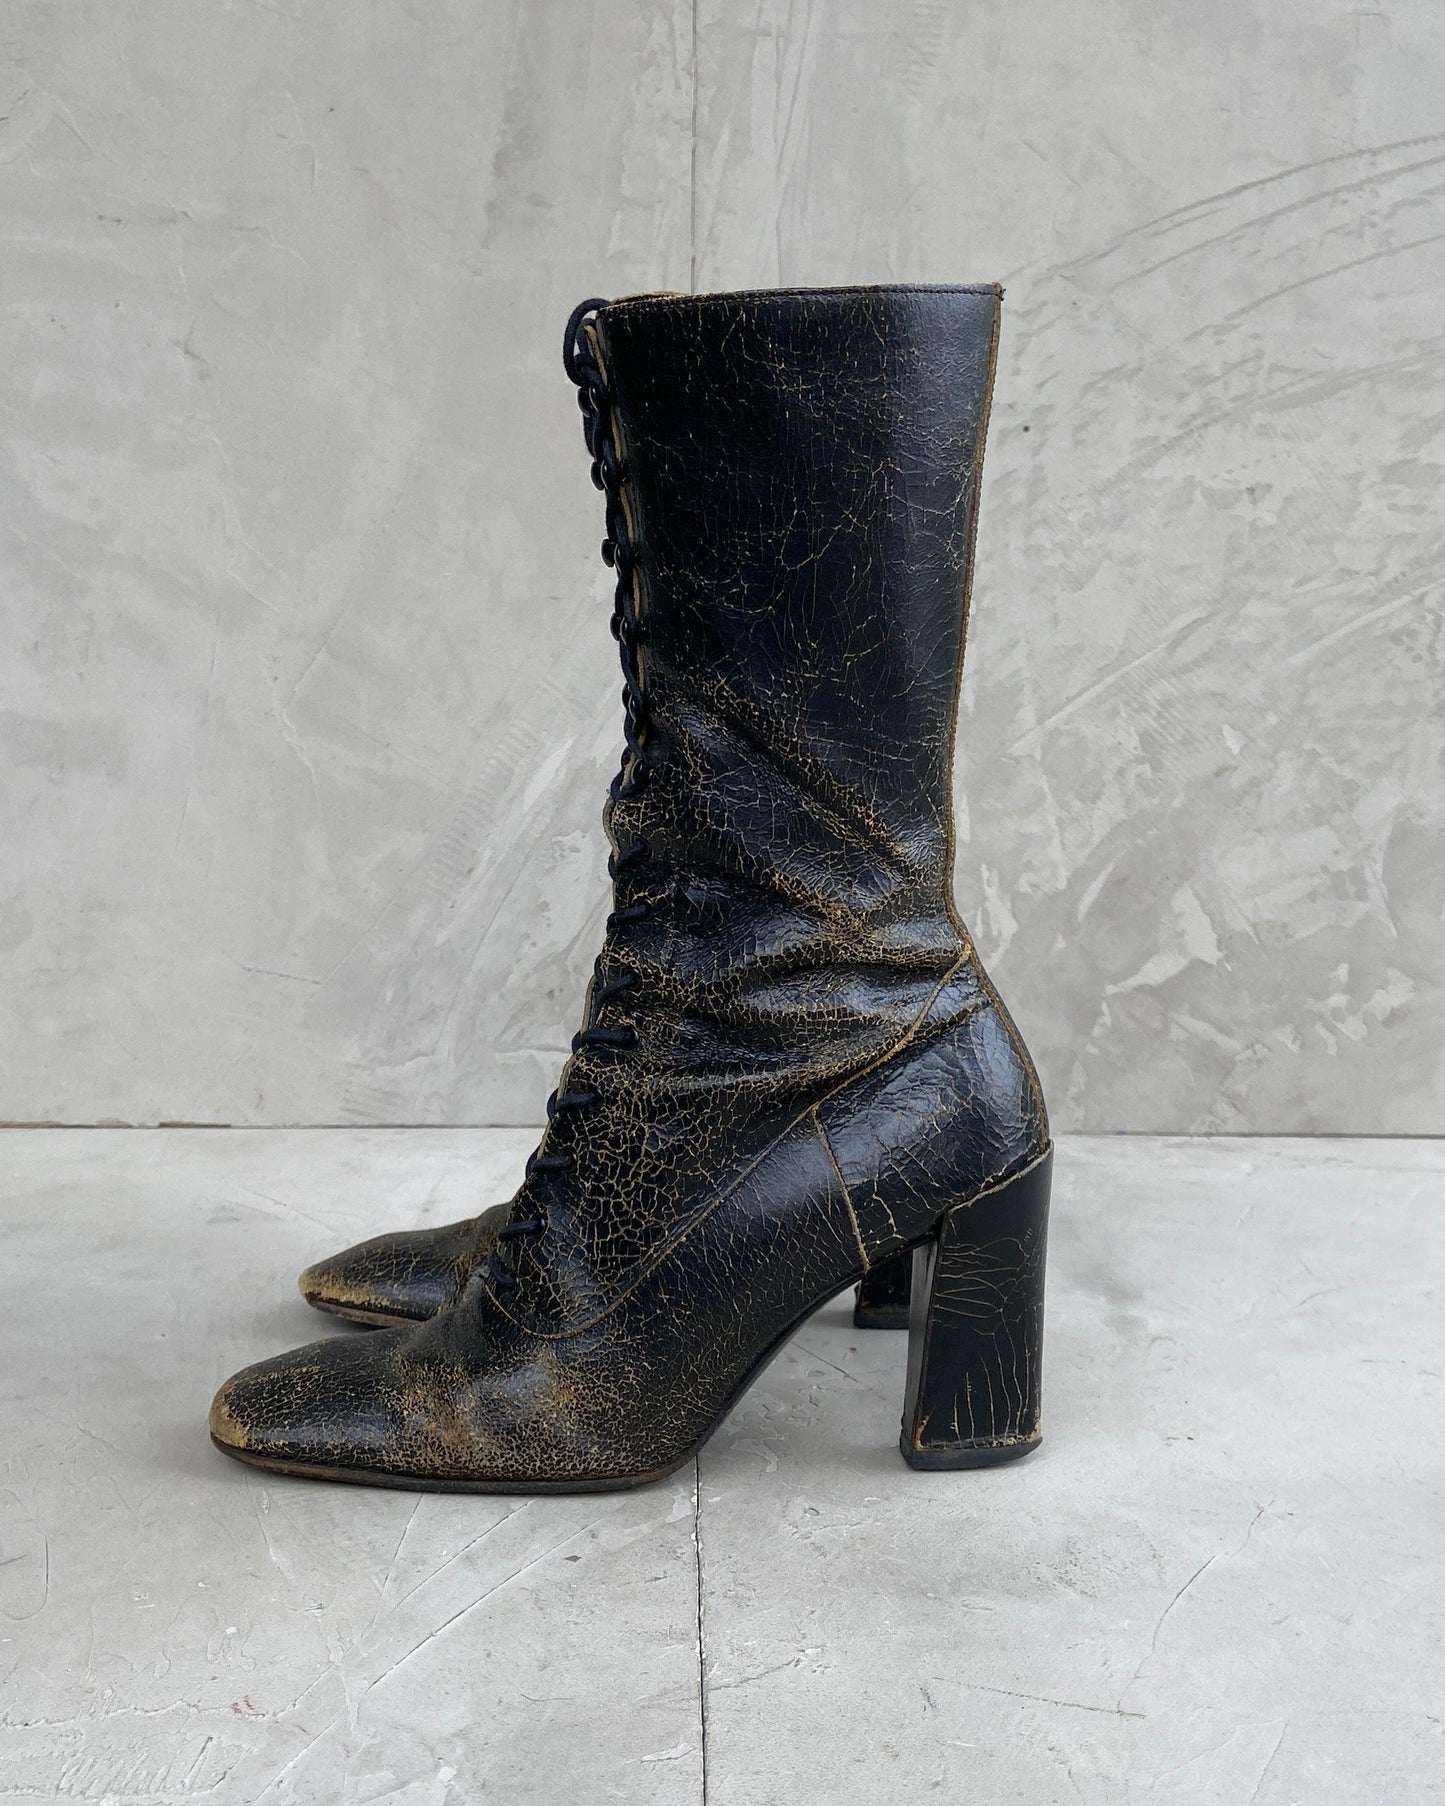 MIU MIU FW2001 CRACKED LEATHER LACE-UP BOOTS - EU 38 / UK 5 - Known Source